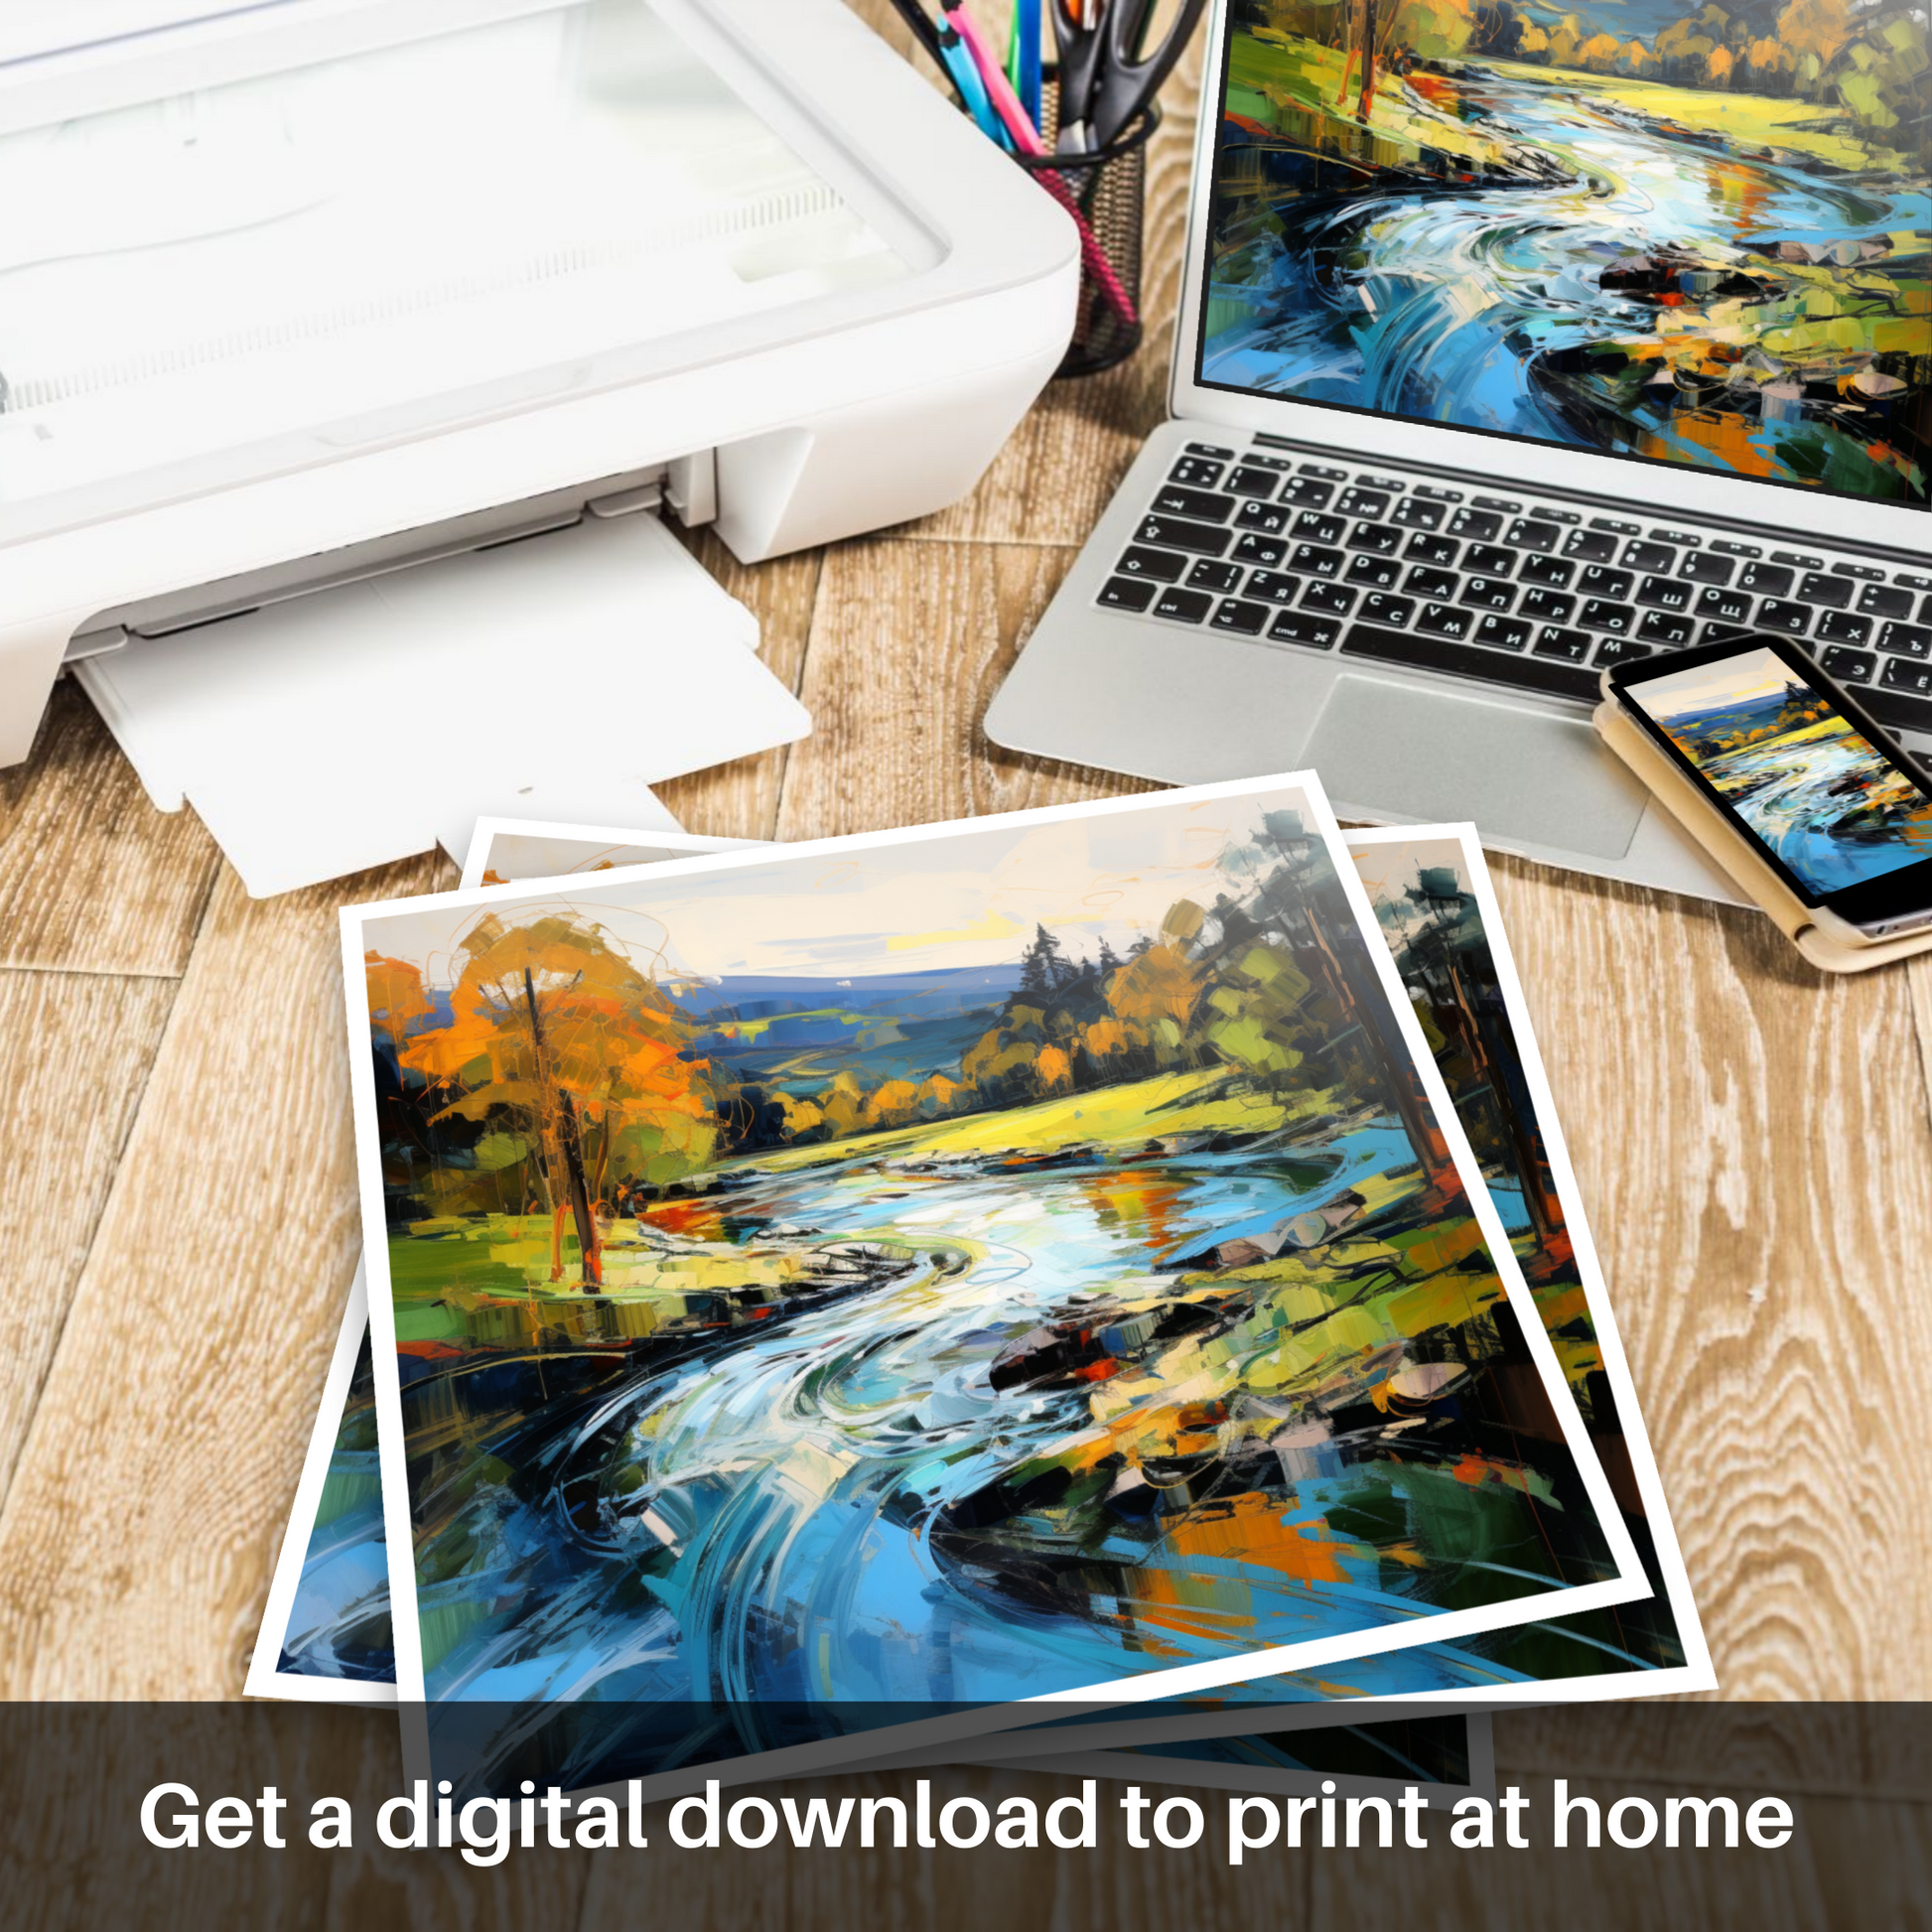 Downloadable and printable picture of River Lyon, Perthshire